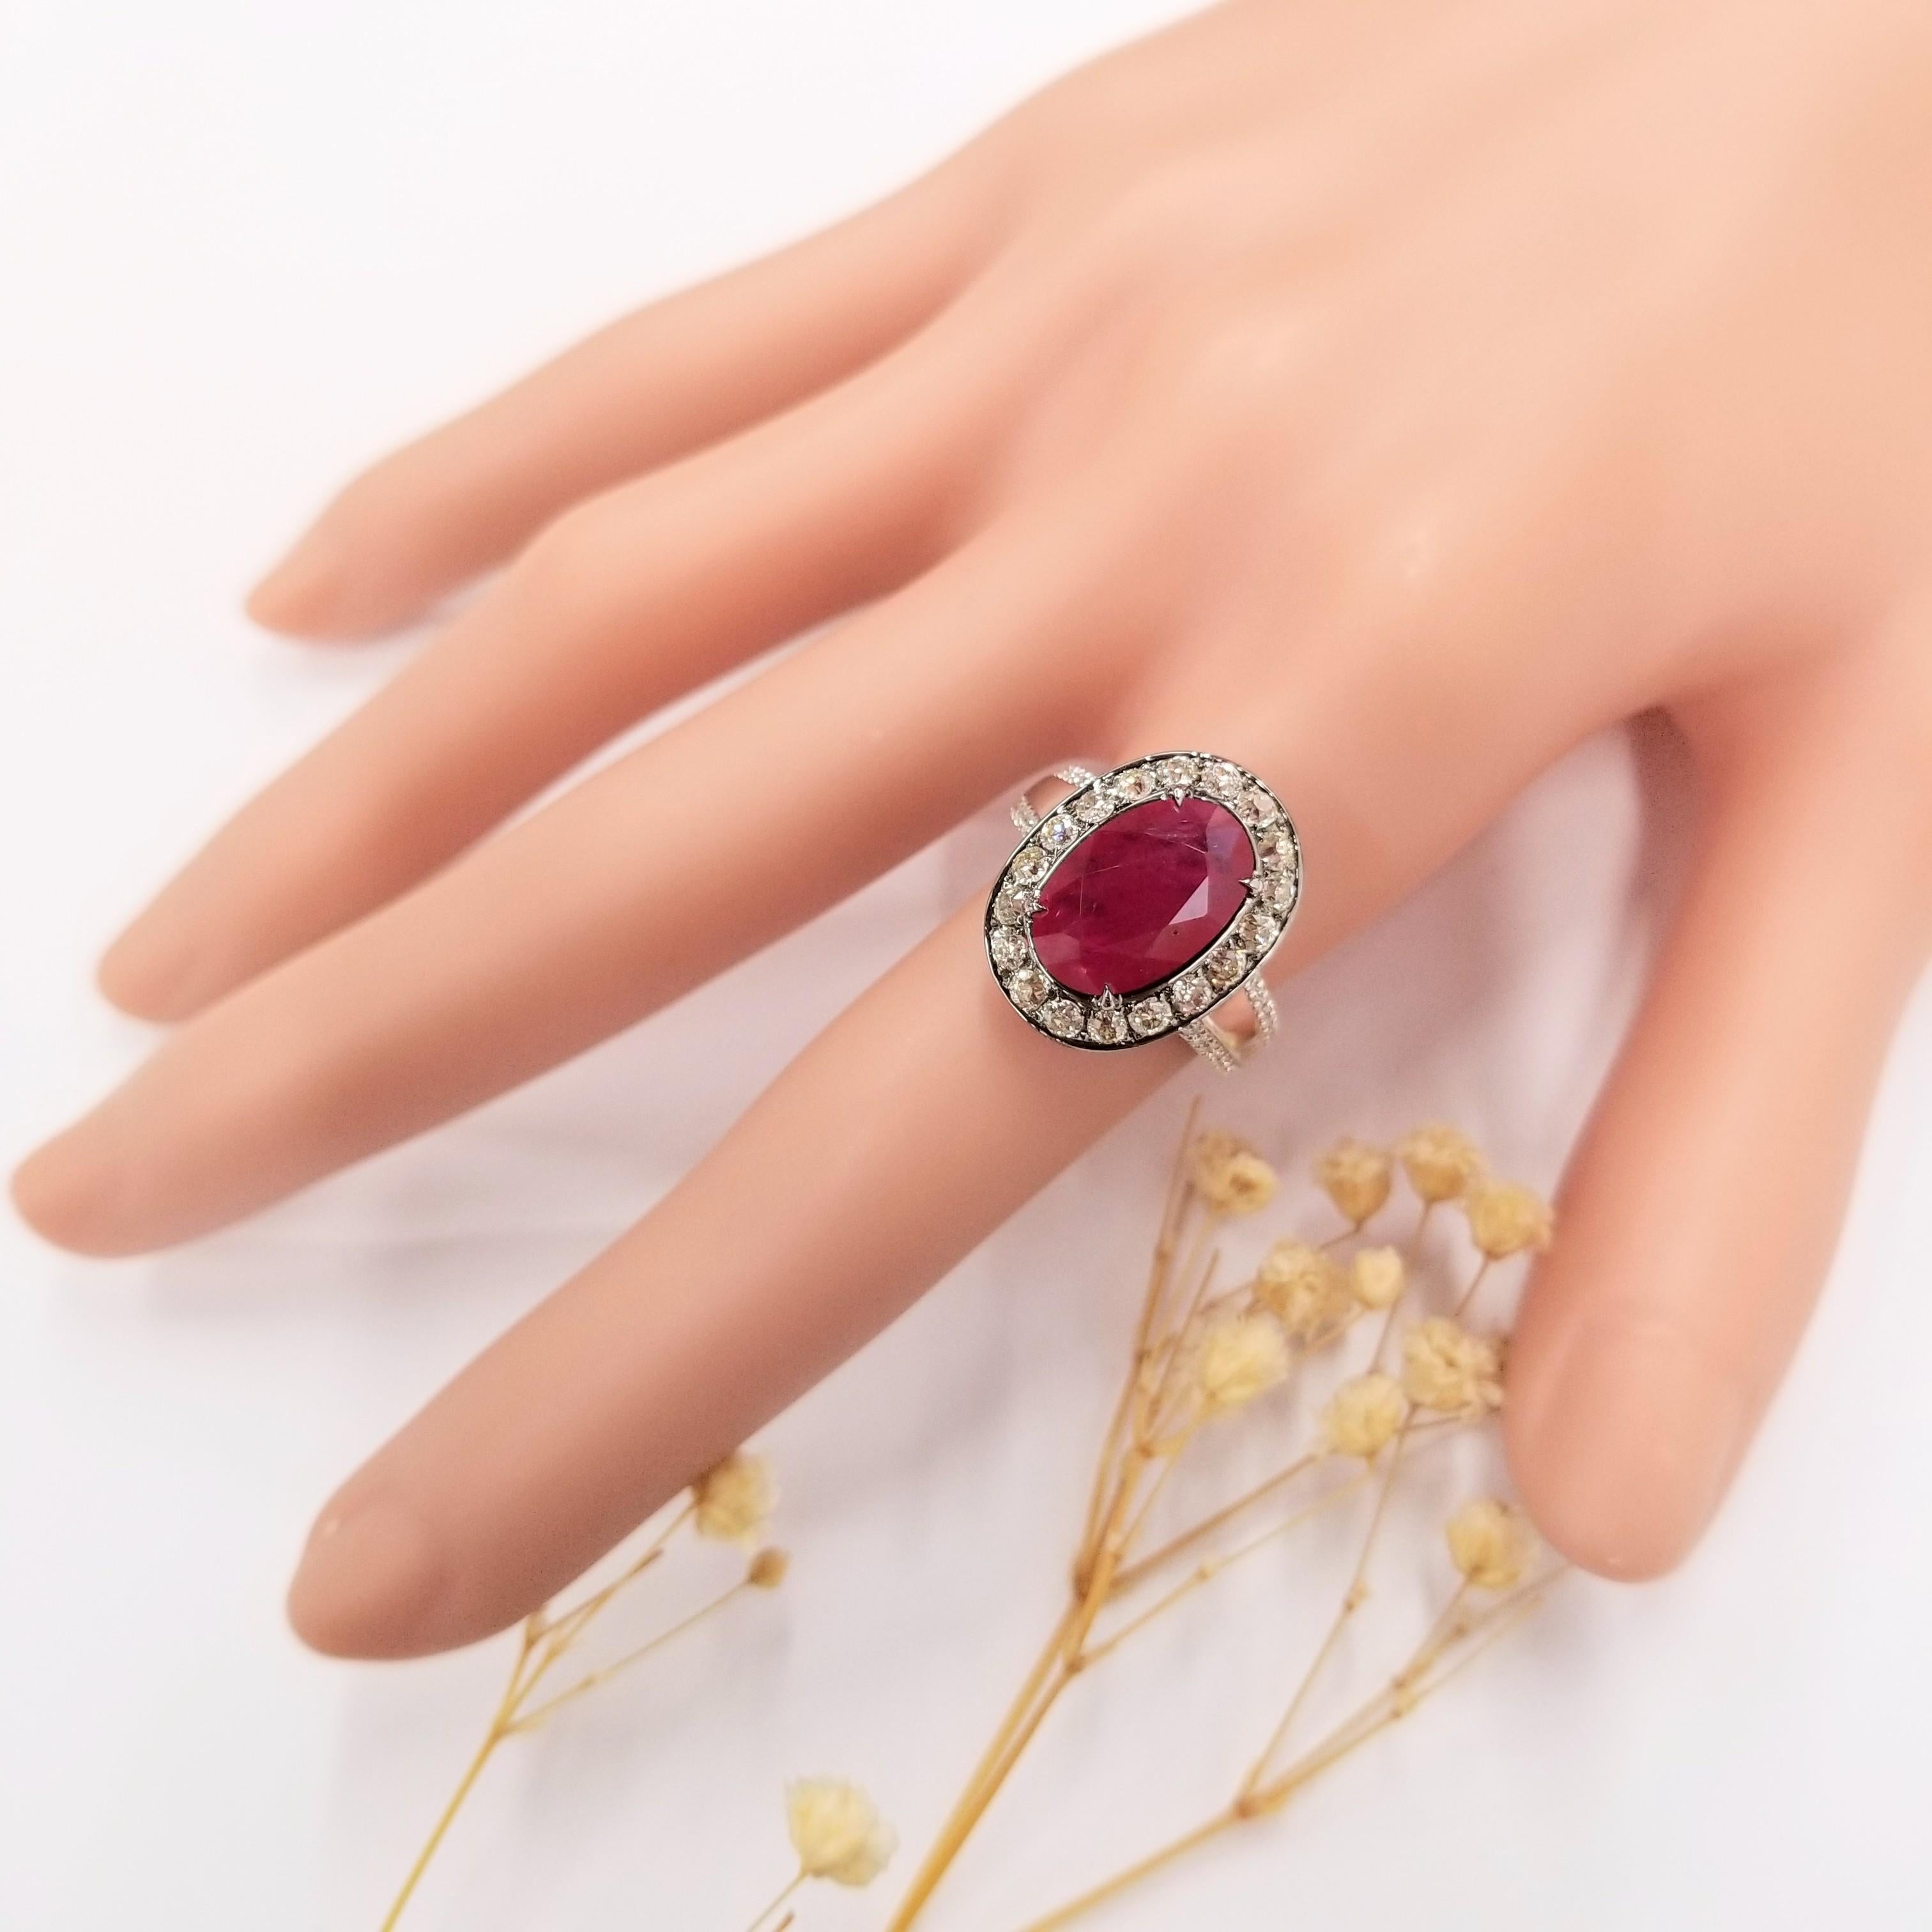 The centerpiece of this remarkable ring is a 3.73 carat deep pink-red natural ruby, exuding a captivating allure. The oval shape of the ruby adds a sense of refinement and sophistication to the design, allowing the gem to command attention from